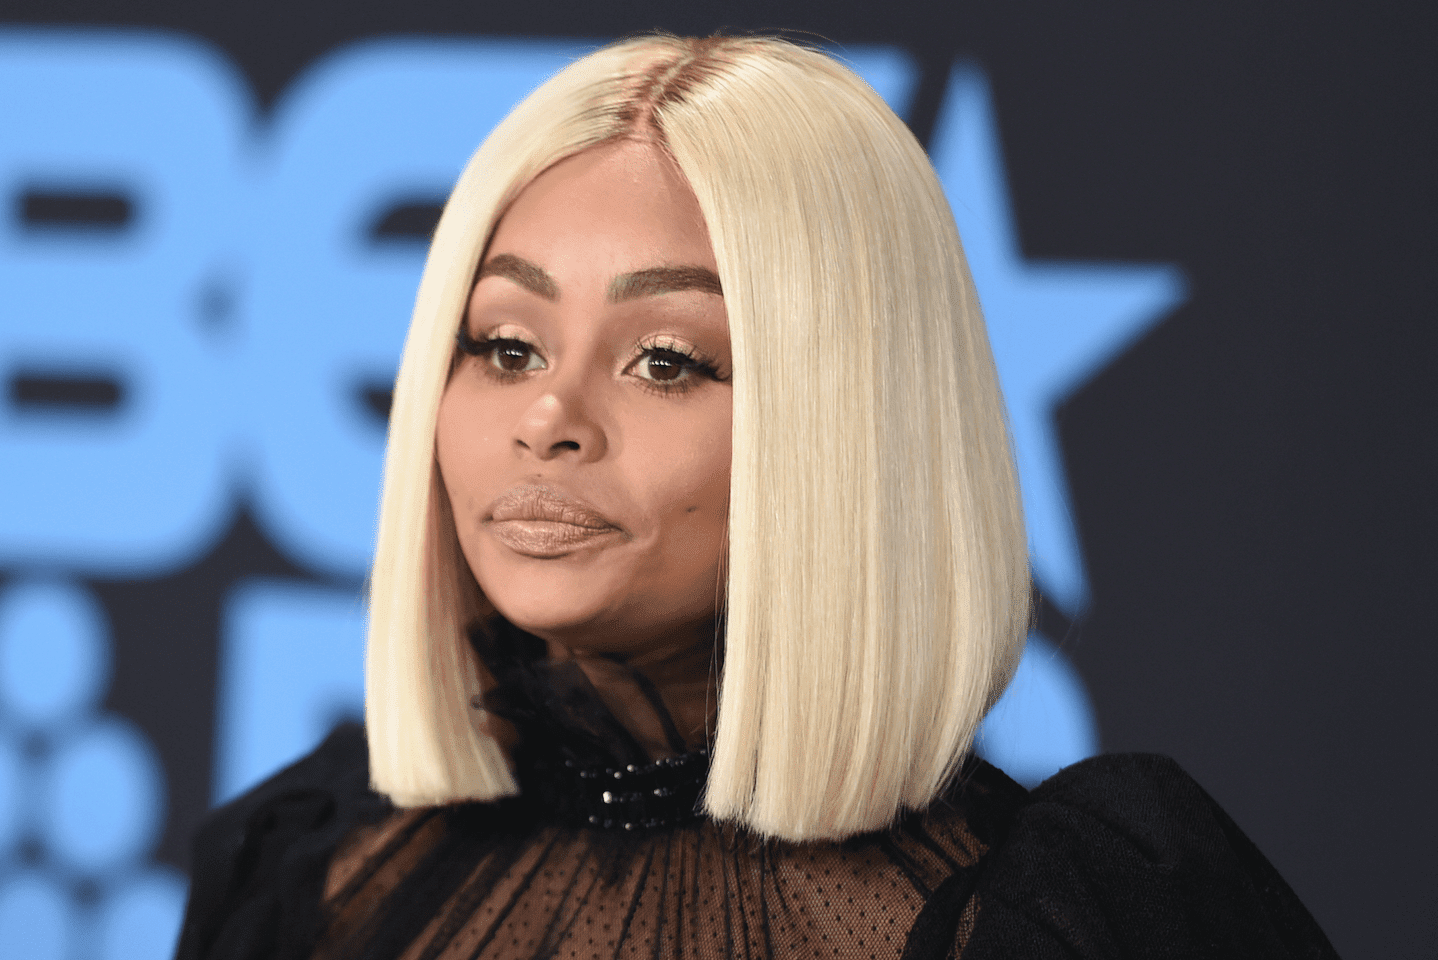 Blac Chyna Shows Fans A Part Of The Team Working On Her Docu-Series